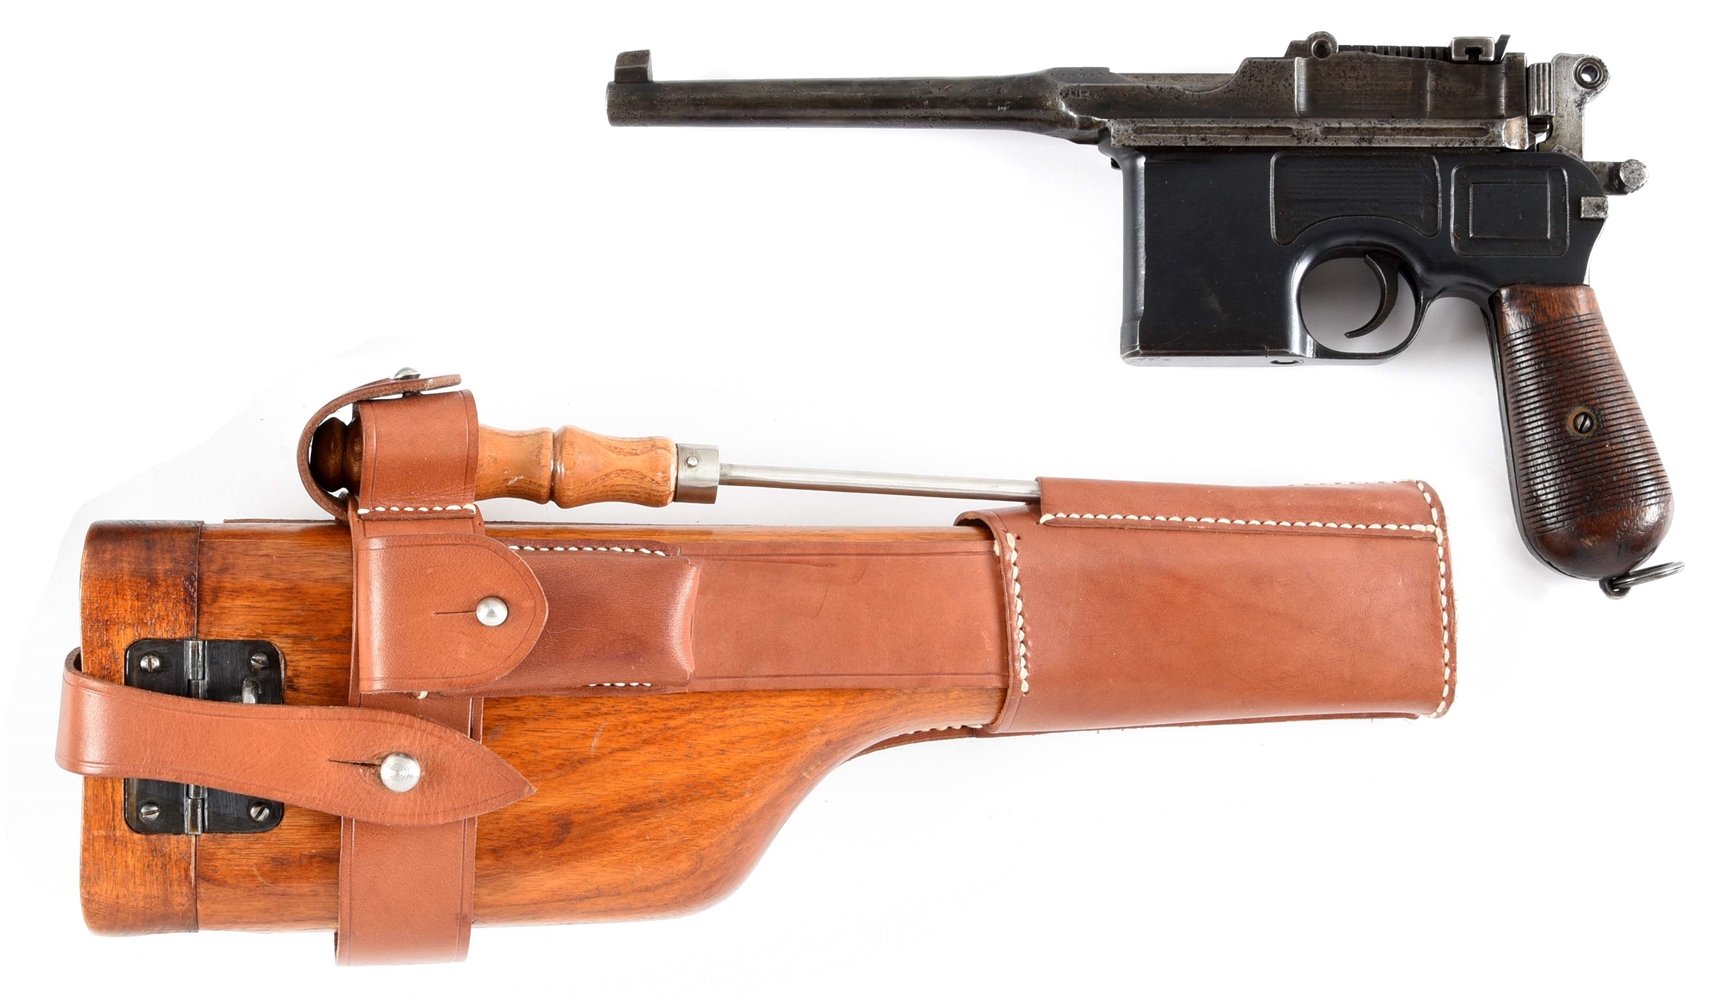 (C) MAUSER C96 SEMI-AUTOMATIC PISTOL WITH STOCK HOLSTER.